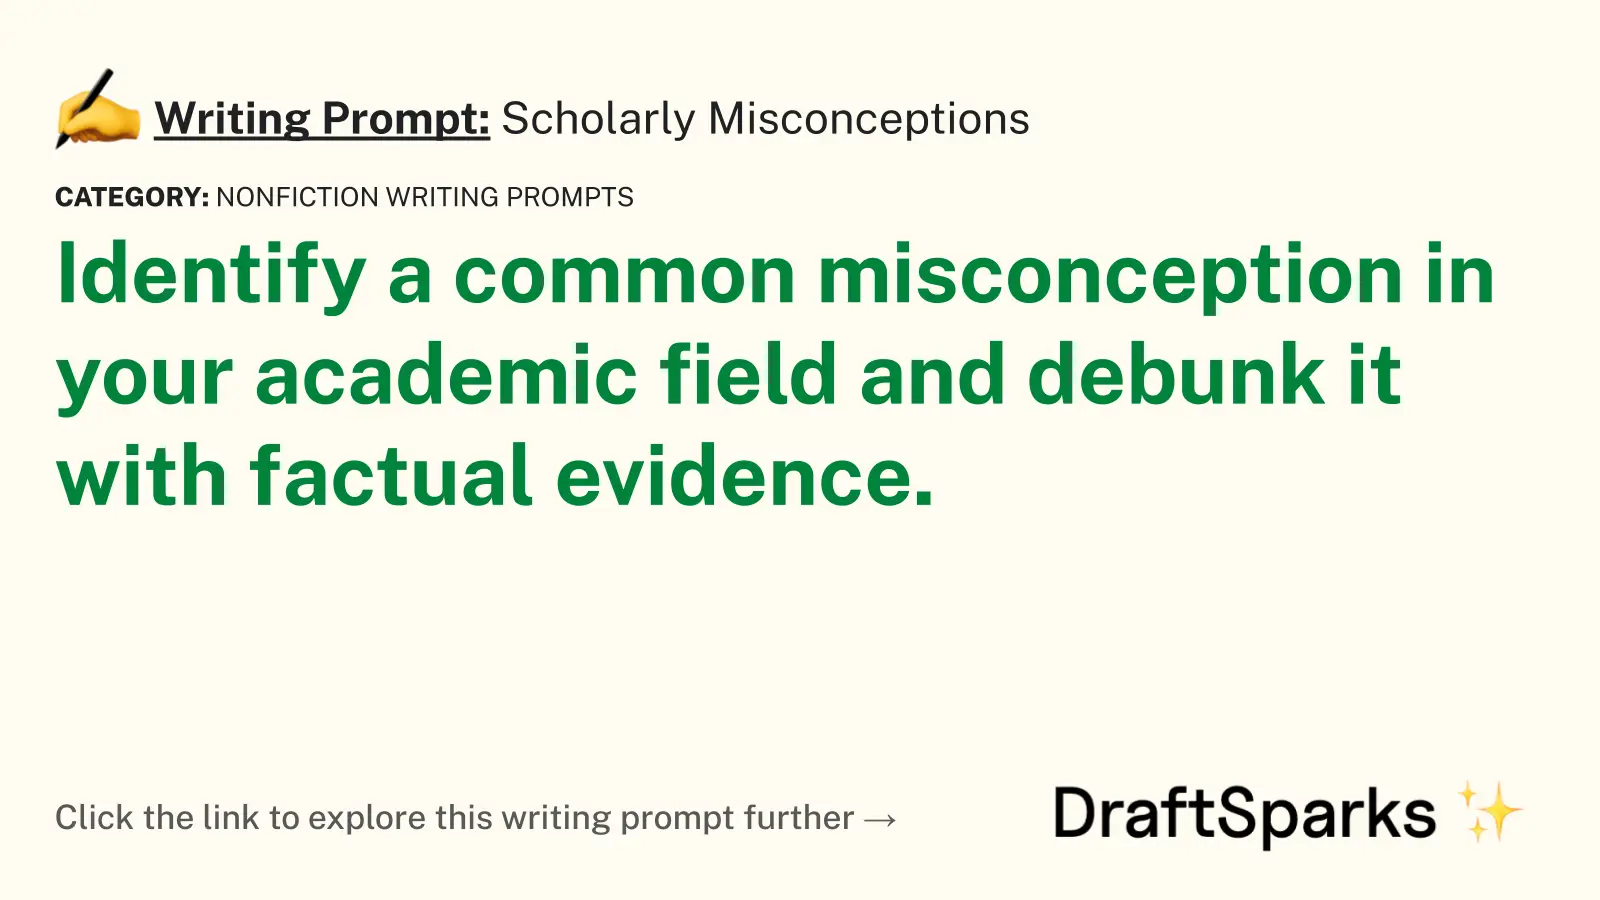 Scholarly Misconceptions